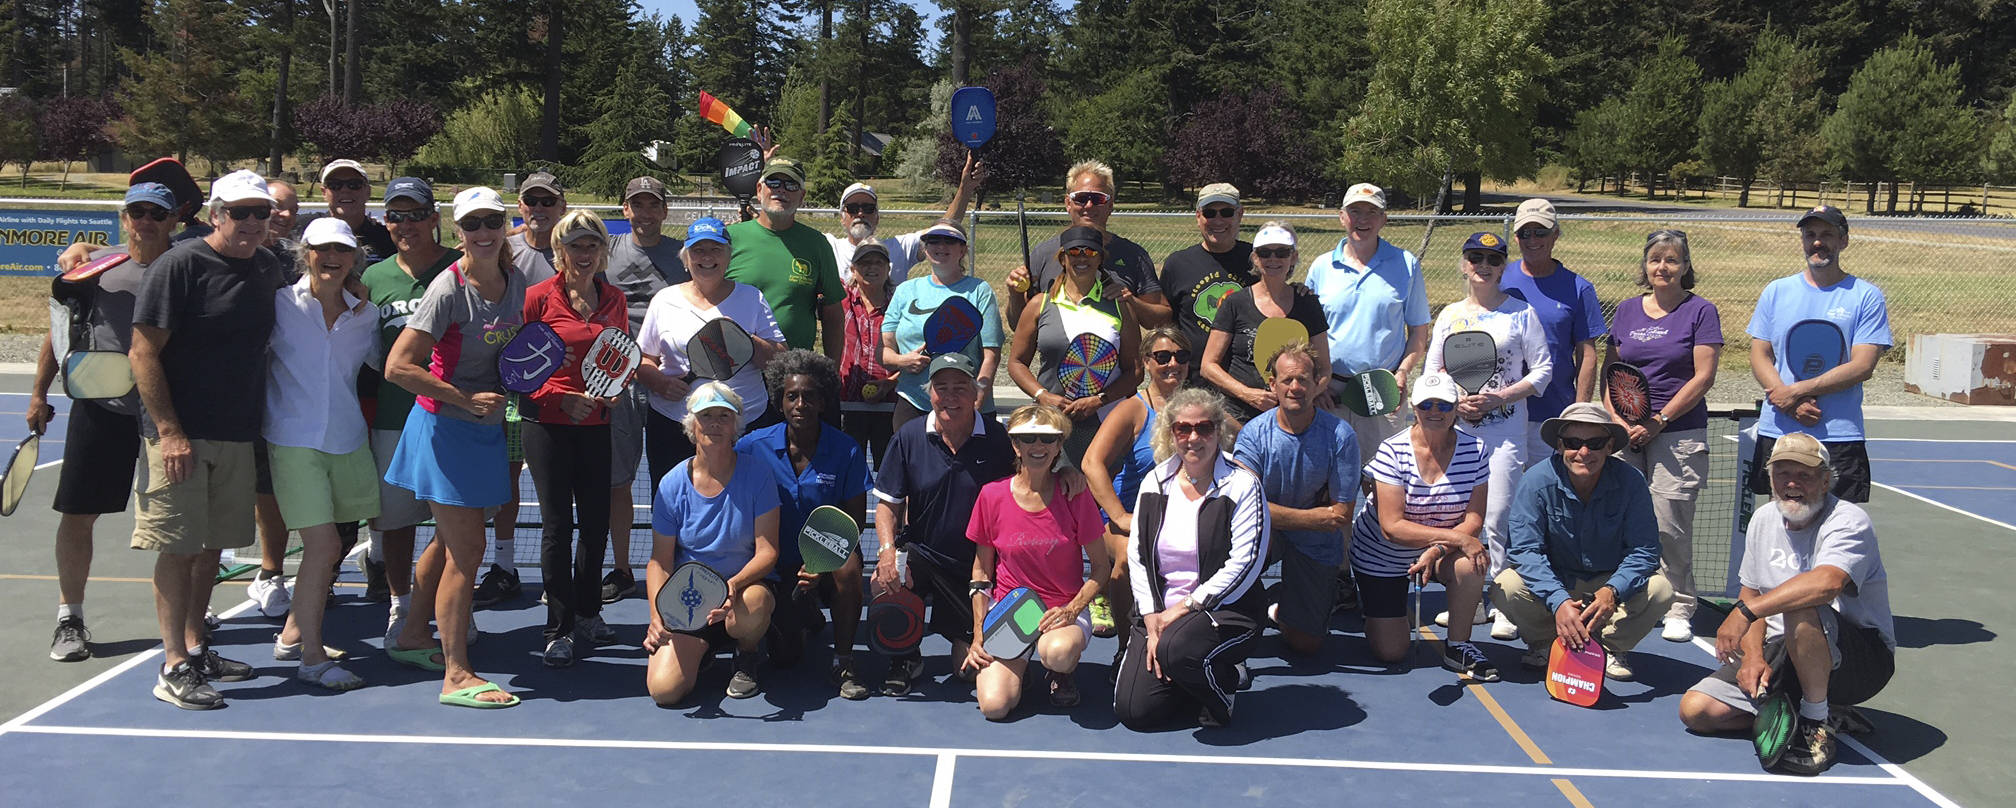 Winners crowned at pickleball tourney